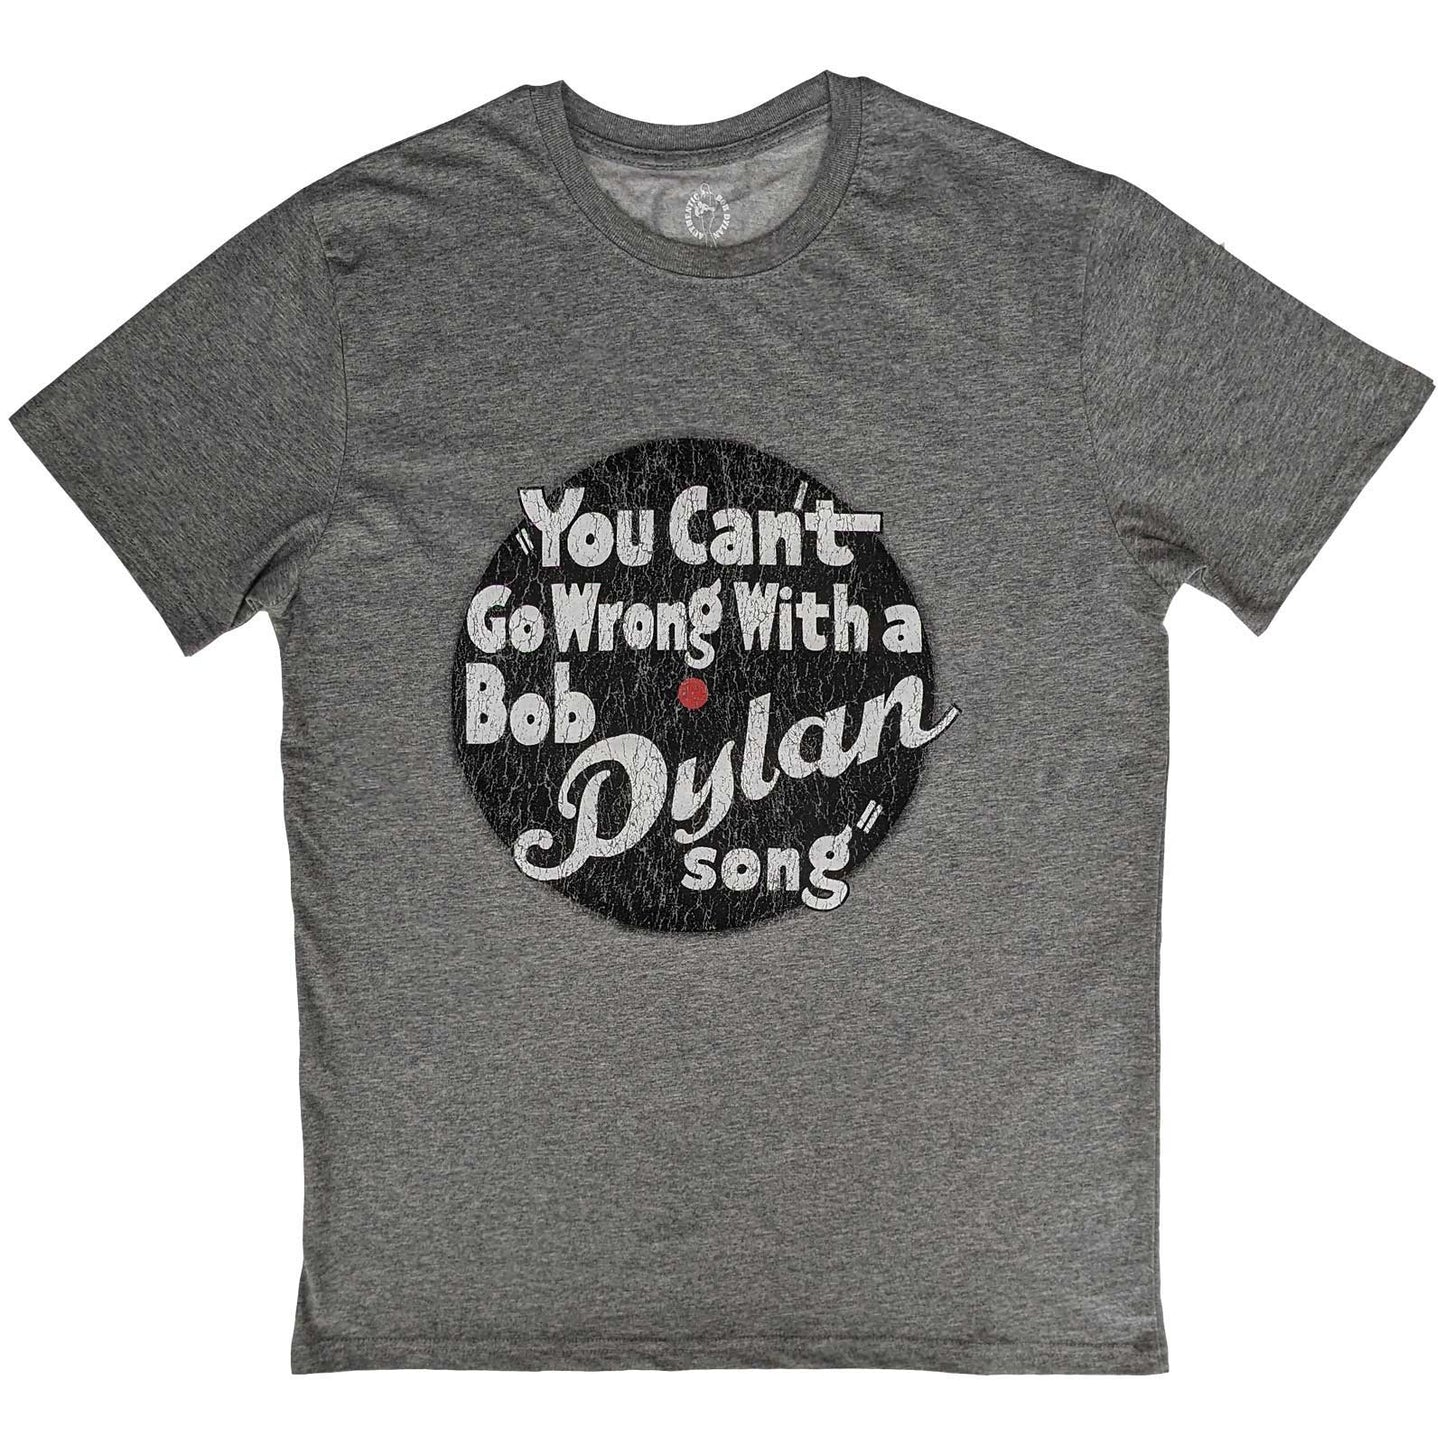 Bob Dylan T-Shirt: You can't go wrong